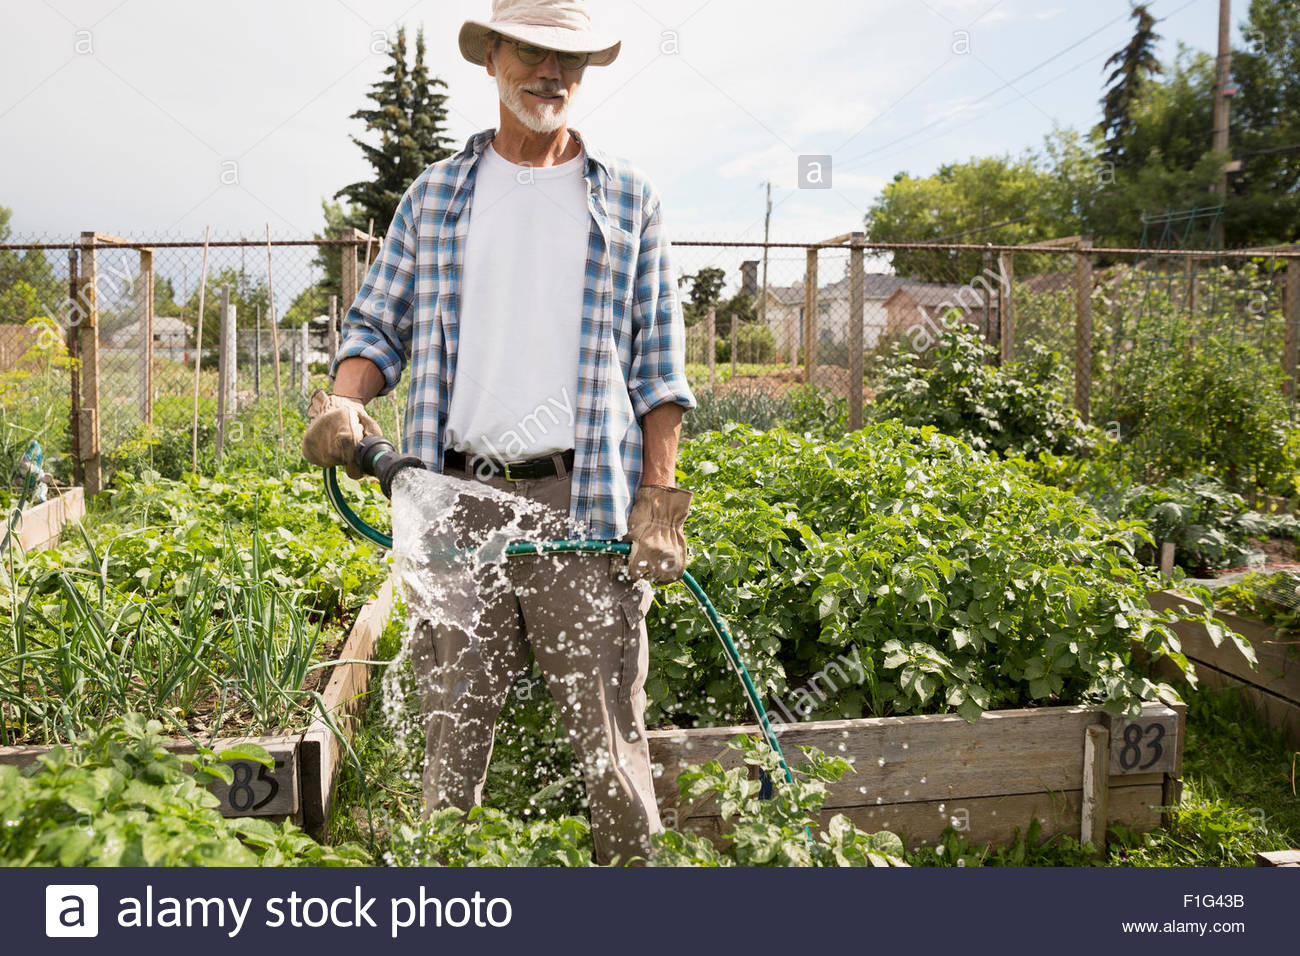 Man watering vegetable garden with hose Stock Photo